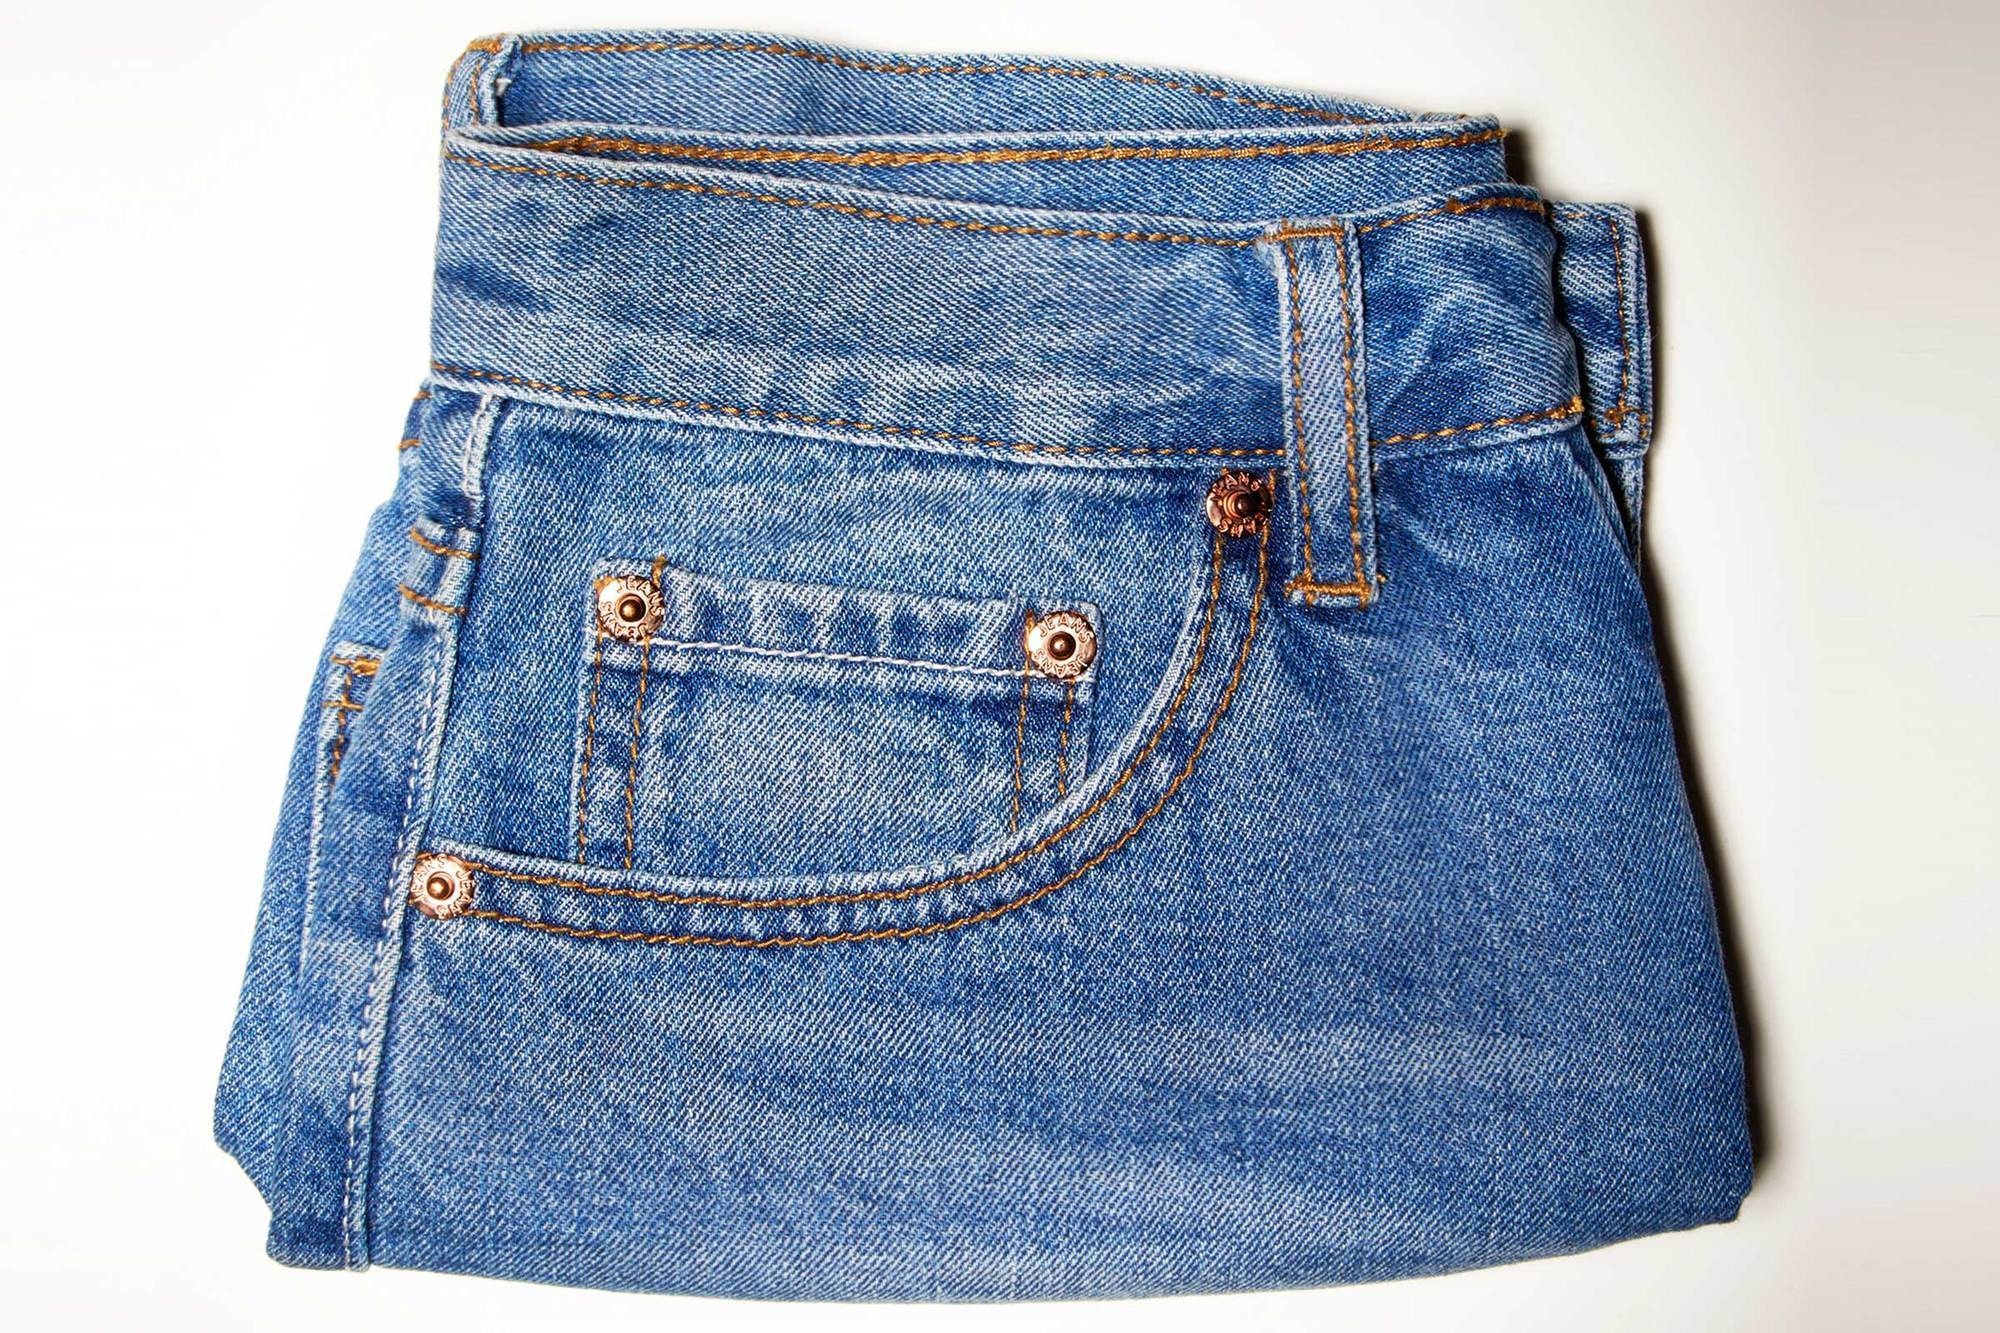 Small Jean Pockets.
We're all used to seeing these tiny pockets on our jeans but we never bothered to find out what they're there for. Turns out, it's a spot saved for your pocket watch! This design dates back to the 1800s, which is where these watches were held on chains or even worn on waistcoats. But cowboys didn't find that practical at all, so when jean-makers introduced this new design, let's just say they totally flipped... in a good way.